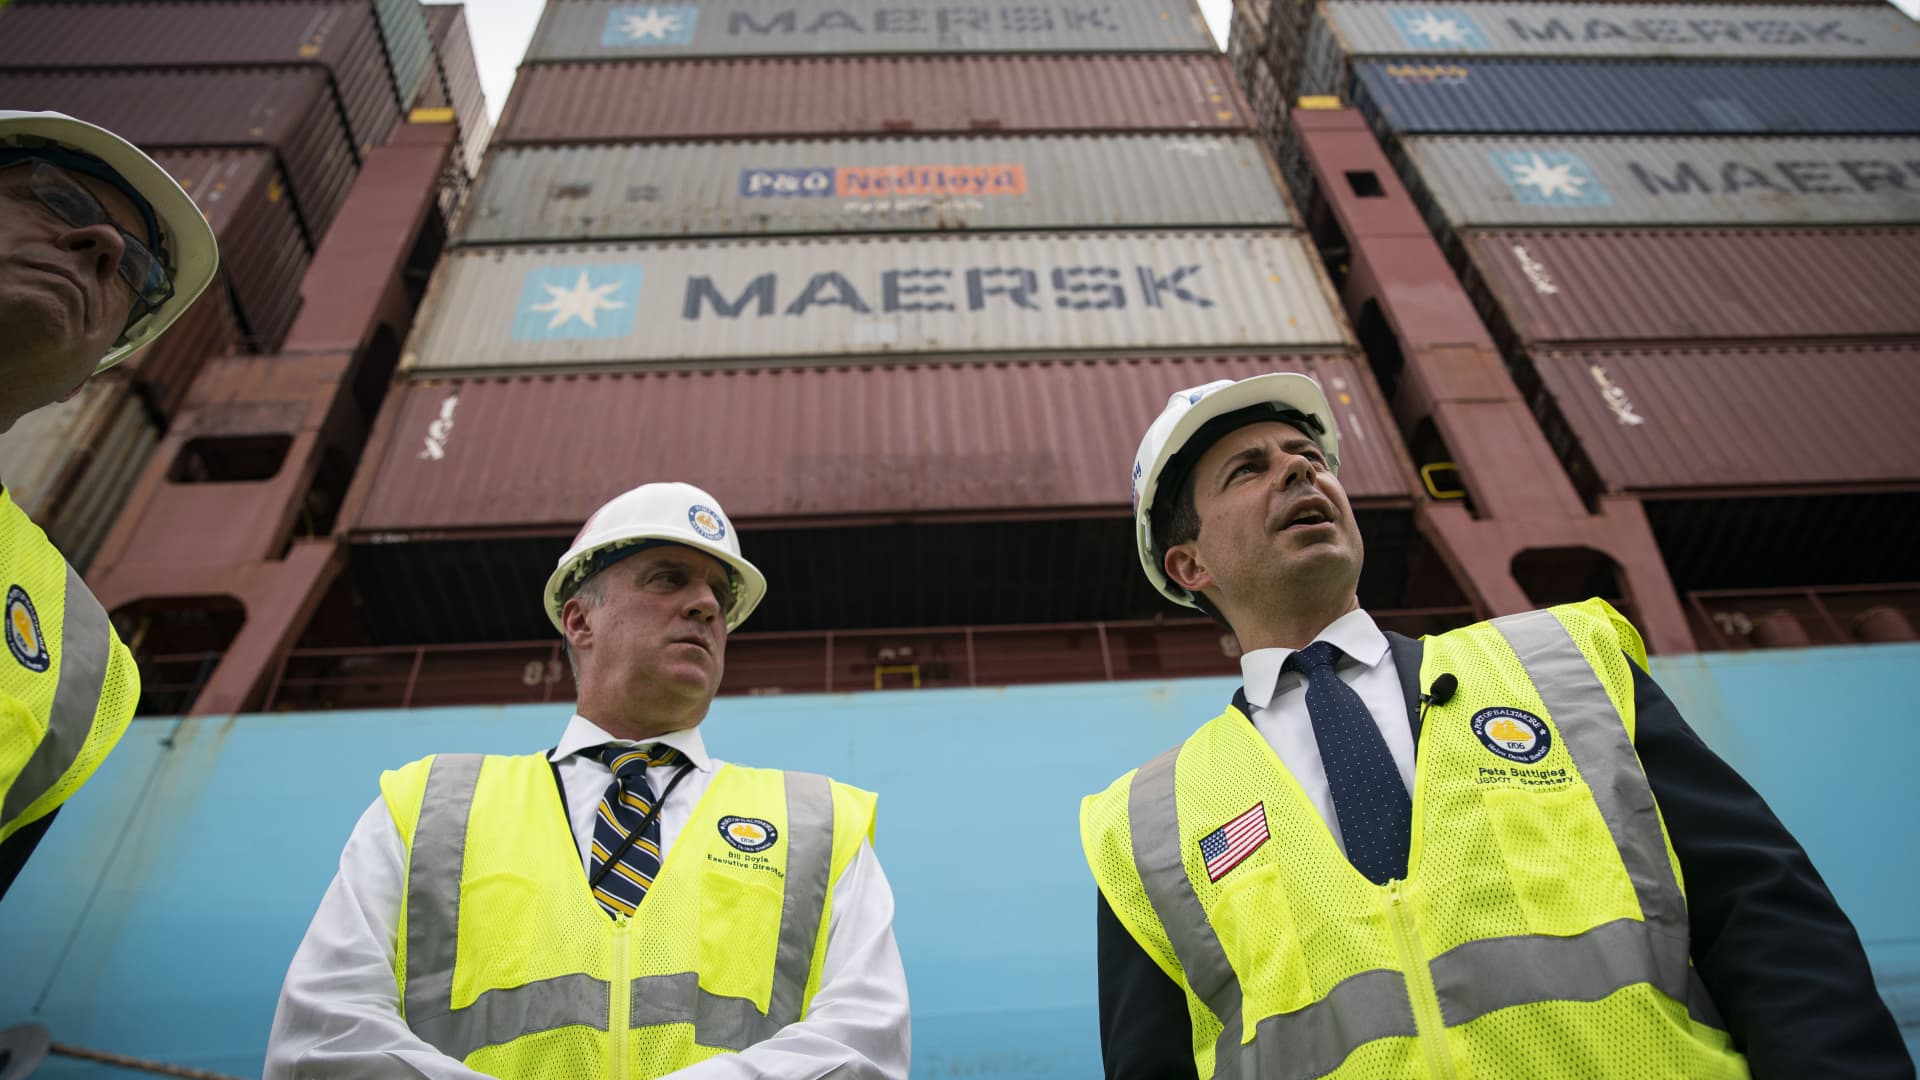 Pete Buttigieg, U.S. secretary of transportation, right, and Bill Doyle, executive director of the Maryland Port Administration, during a tour of the Seagirt marine terminal at the Port of Baltimore, Maryland, U.S., on Thursday, July 29, 2021.